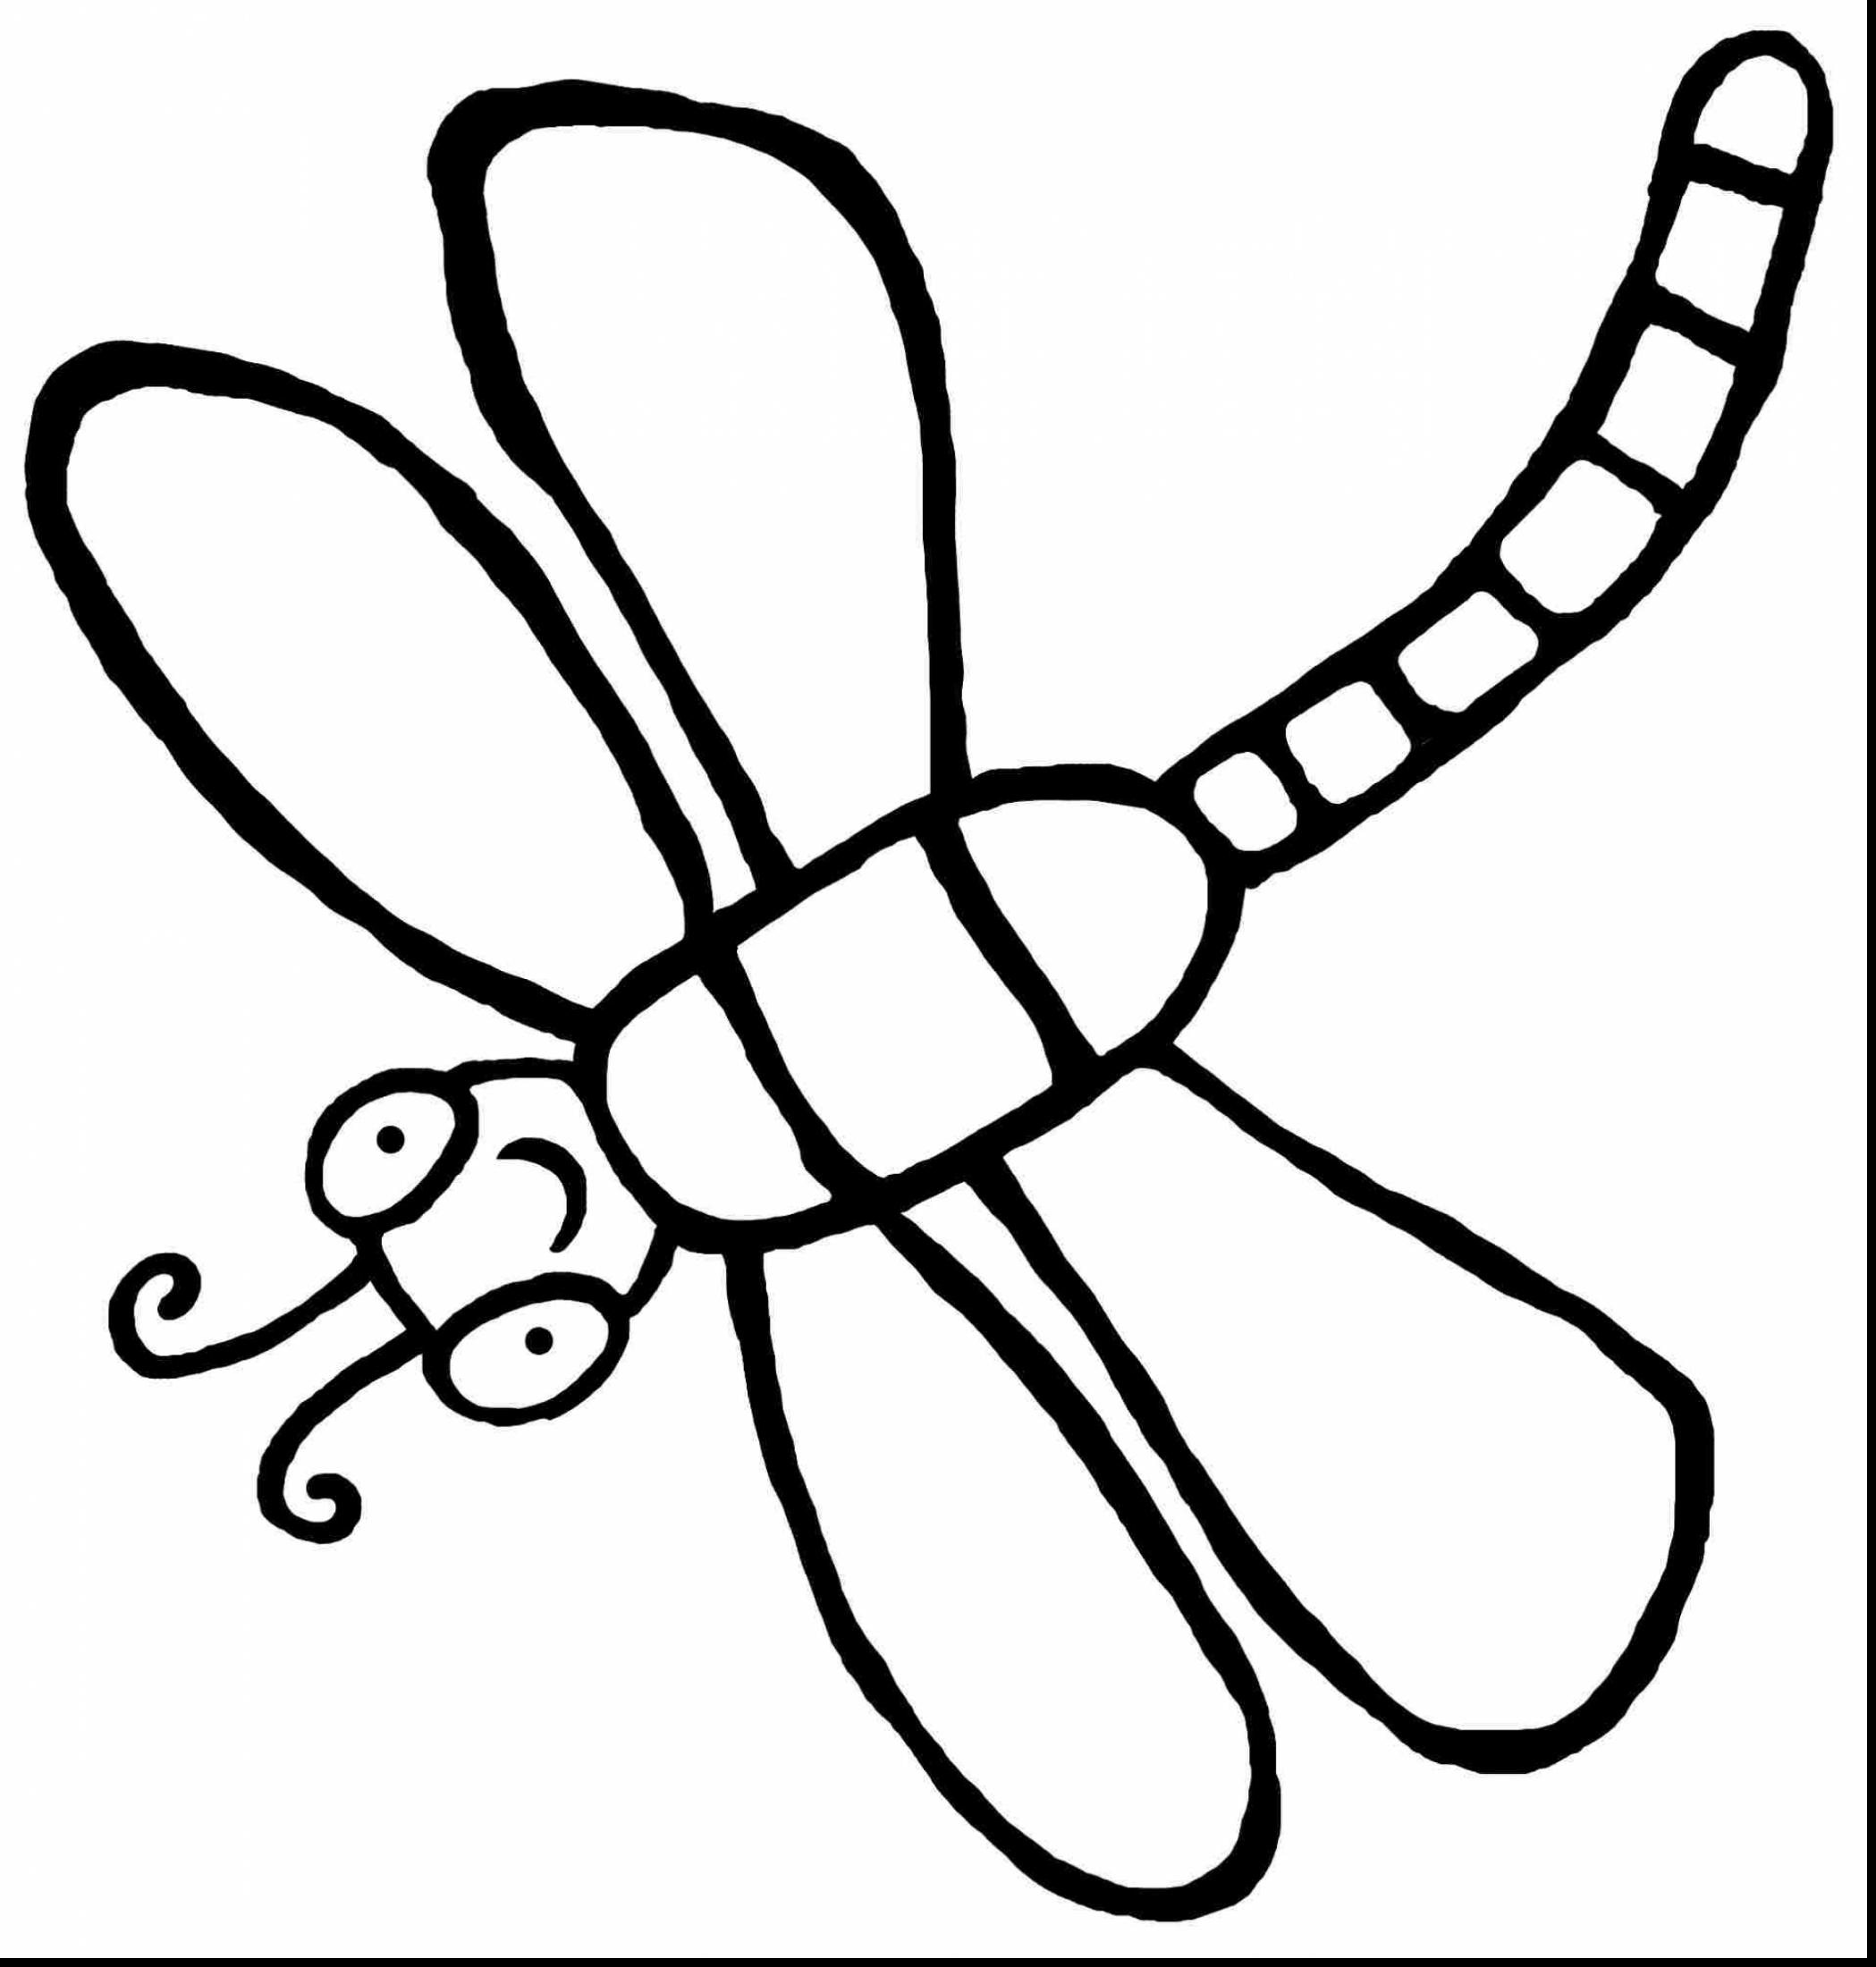 Dragonfly clipart traceable, Dragonfly traceable Transparent FREE for ...